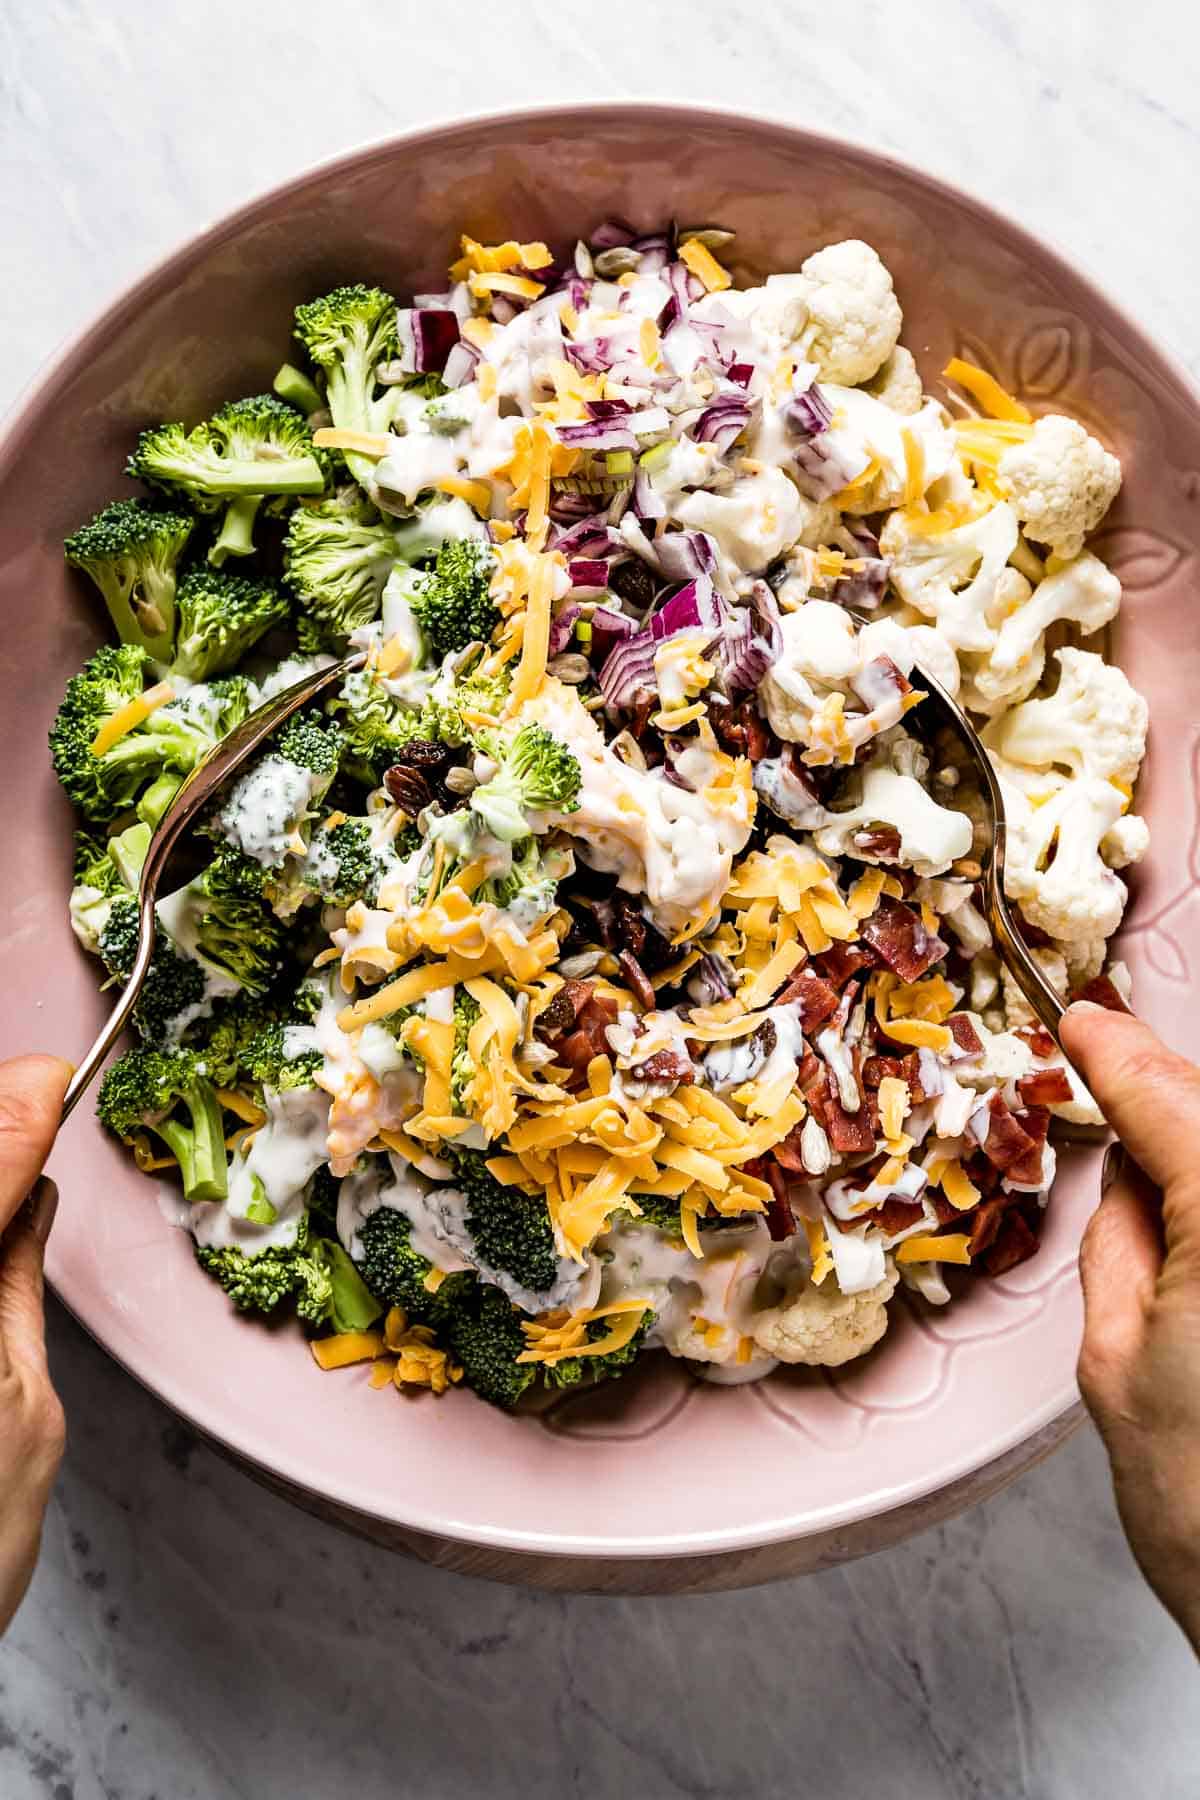 Broccoli Cauliflower salad being mixed by a person.